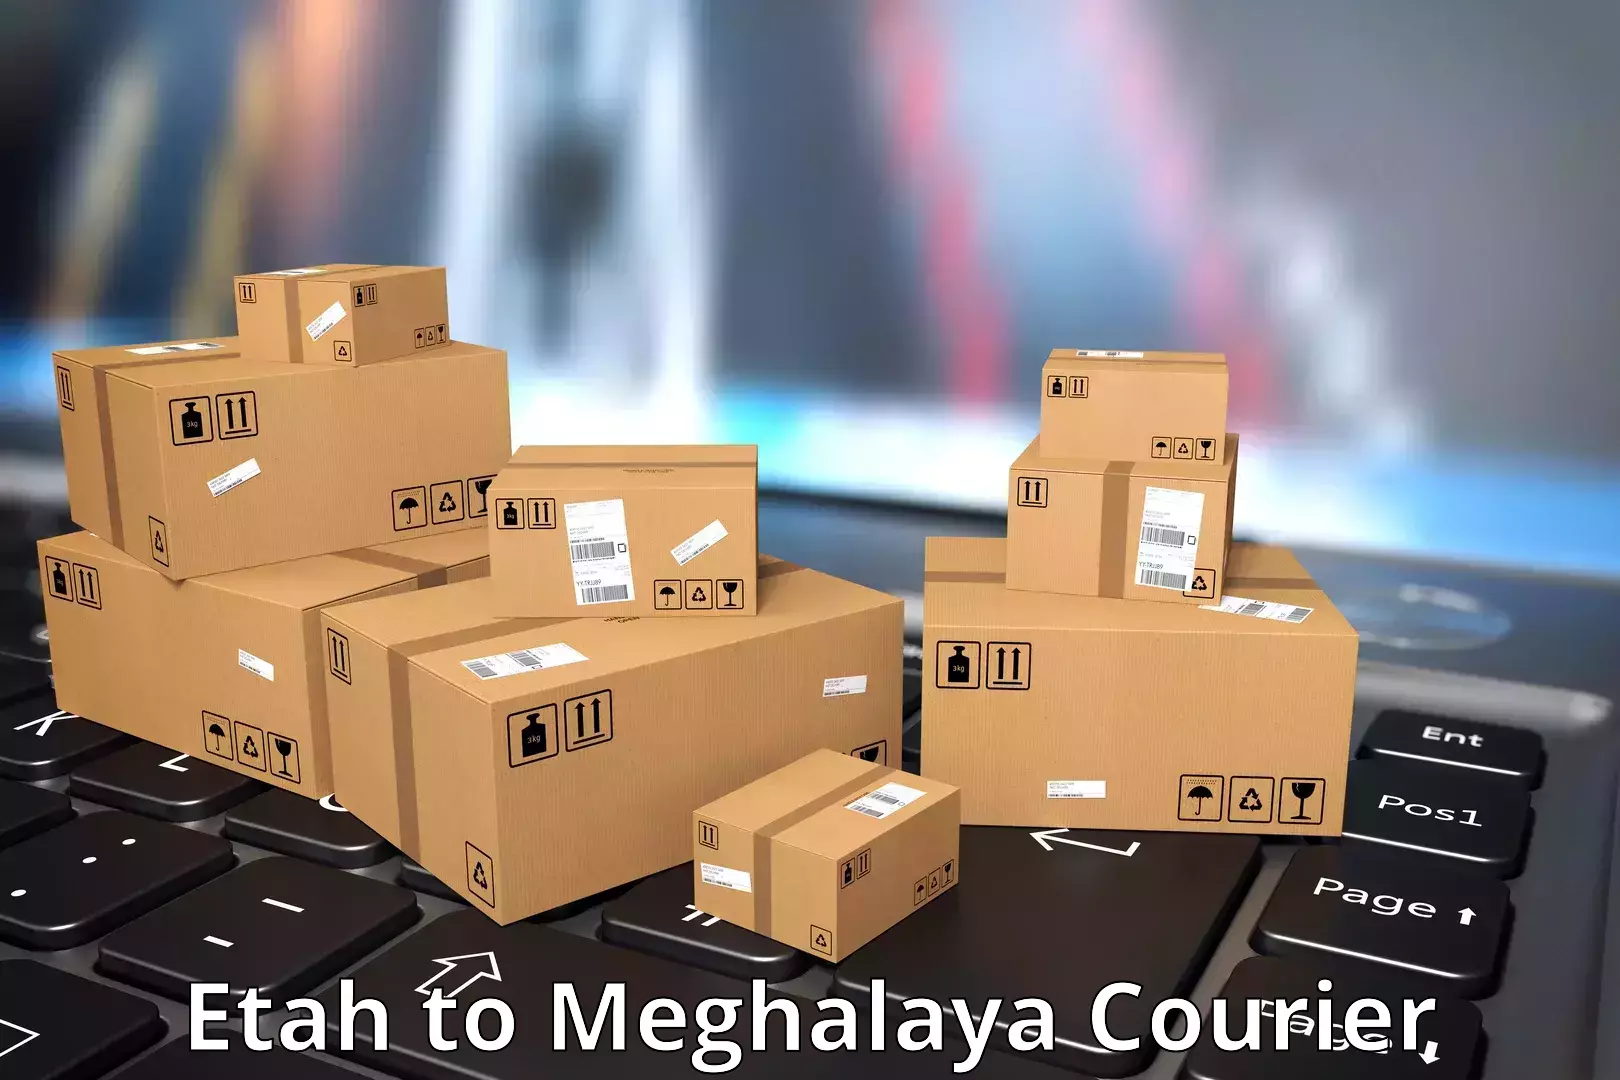 Round-the-clock parcel delivery Etah to Meghalaya